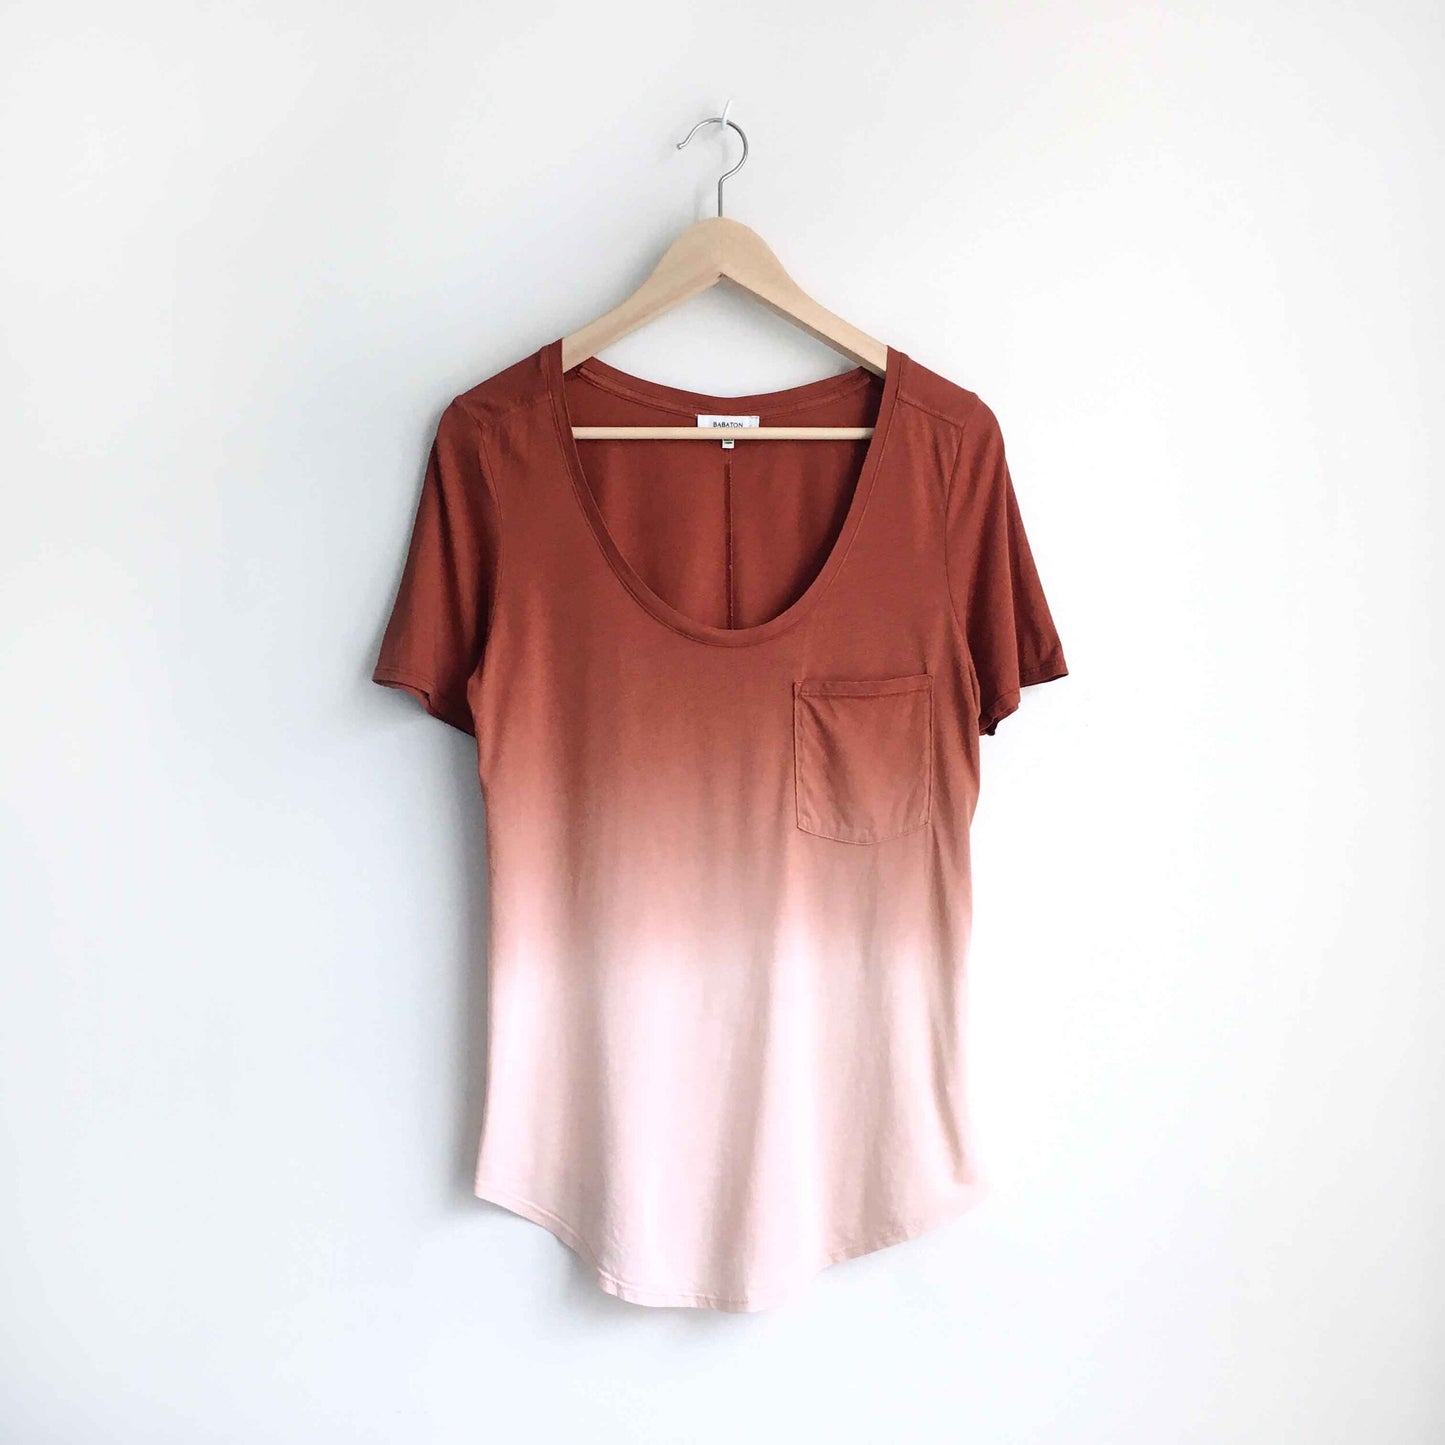 Babaton ombre pocket tee - size Small